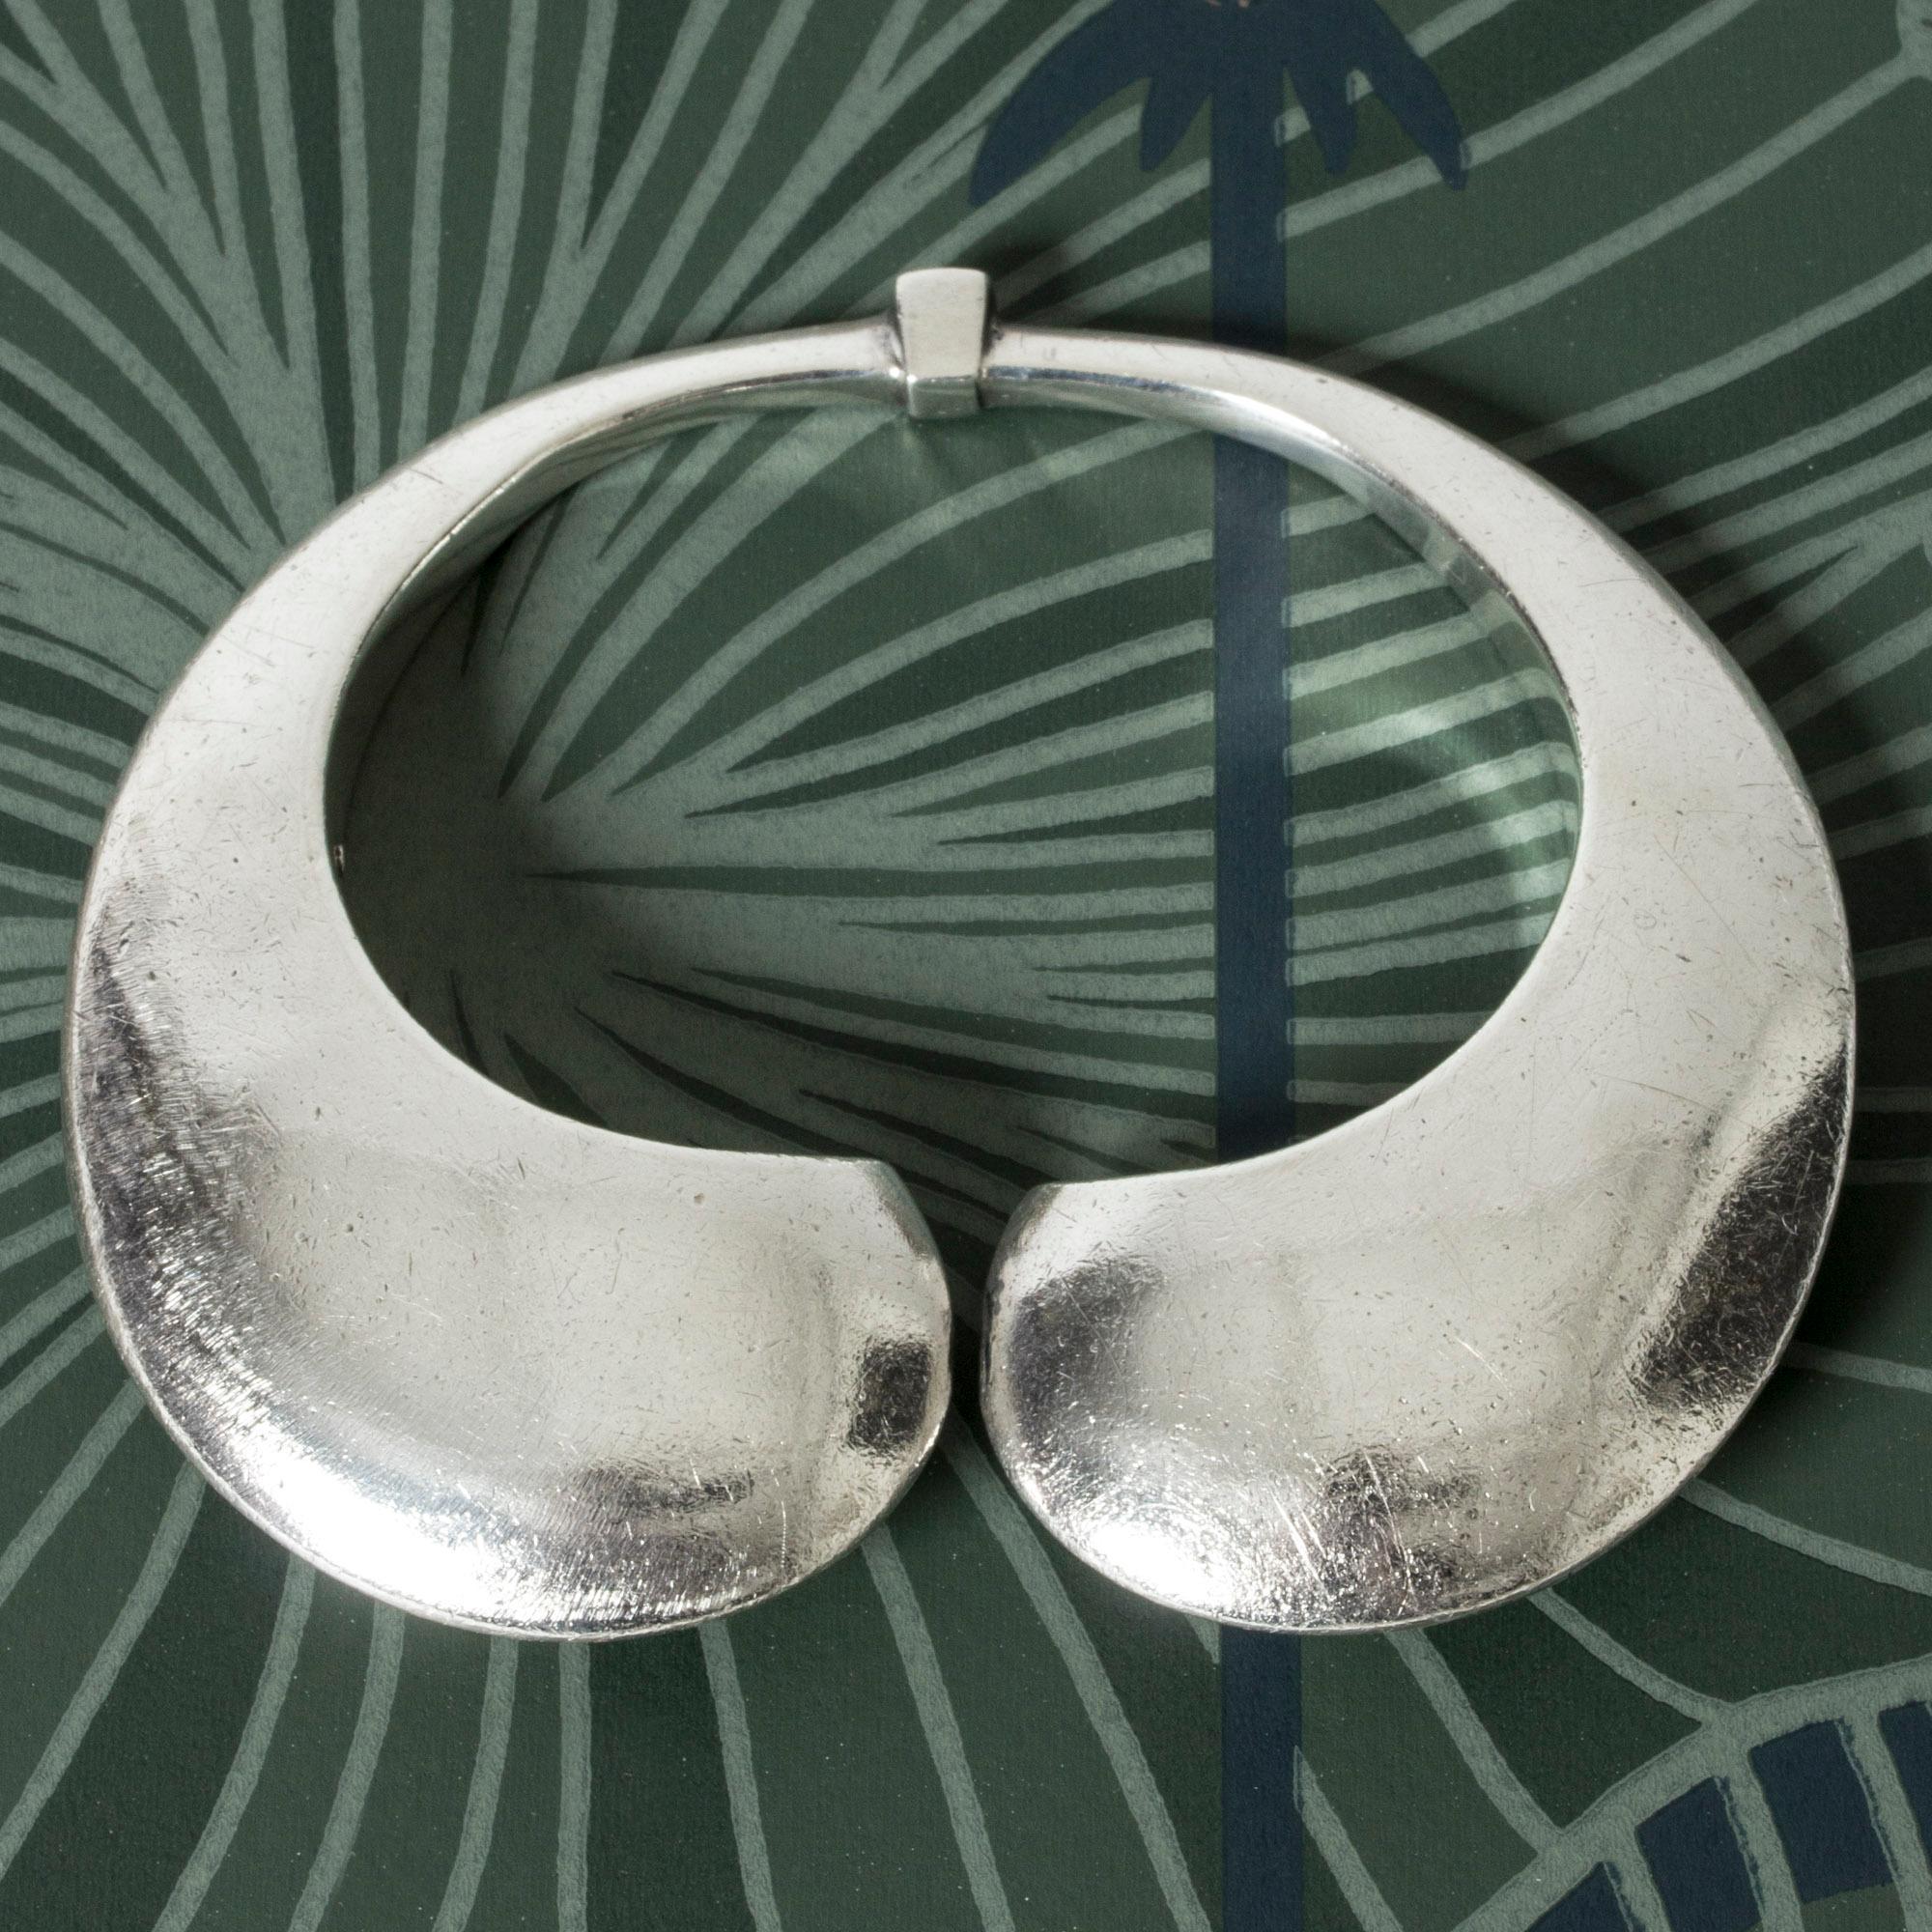 Striking silver bracelet by Olof Barve, in a bold, oversized design. Streamlined, organic lines, solid weight.

